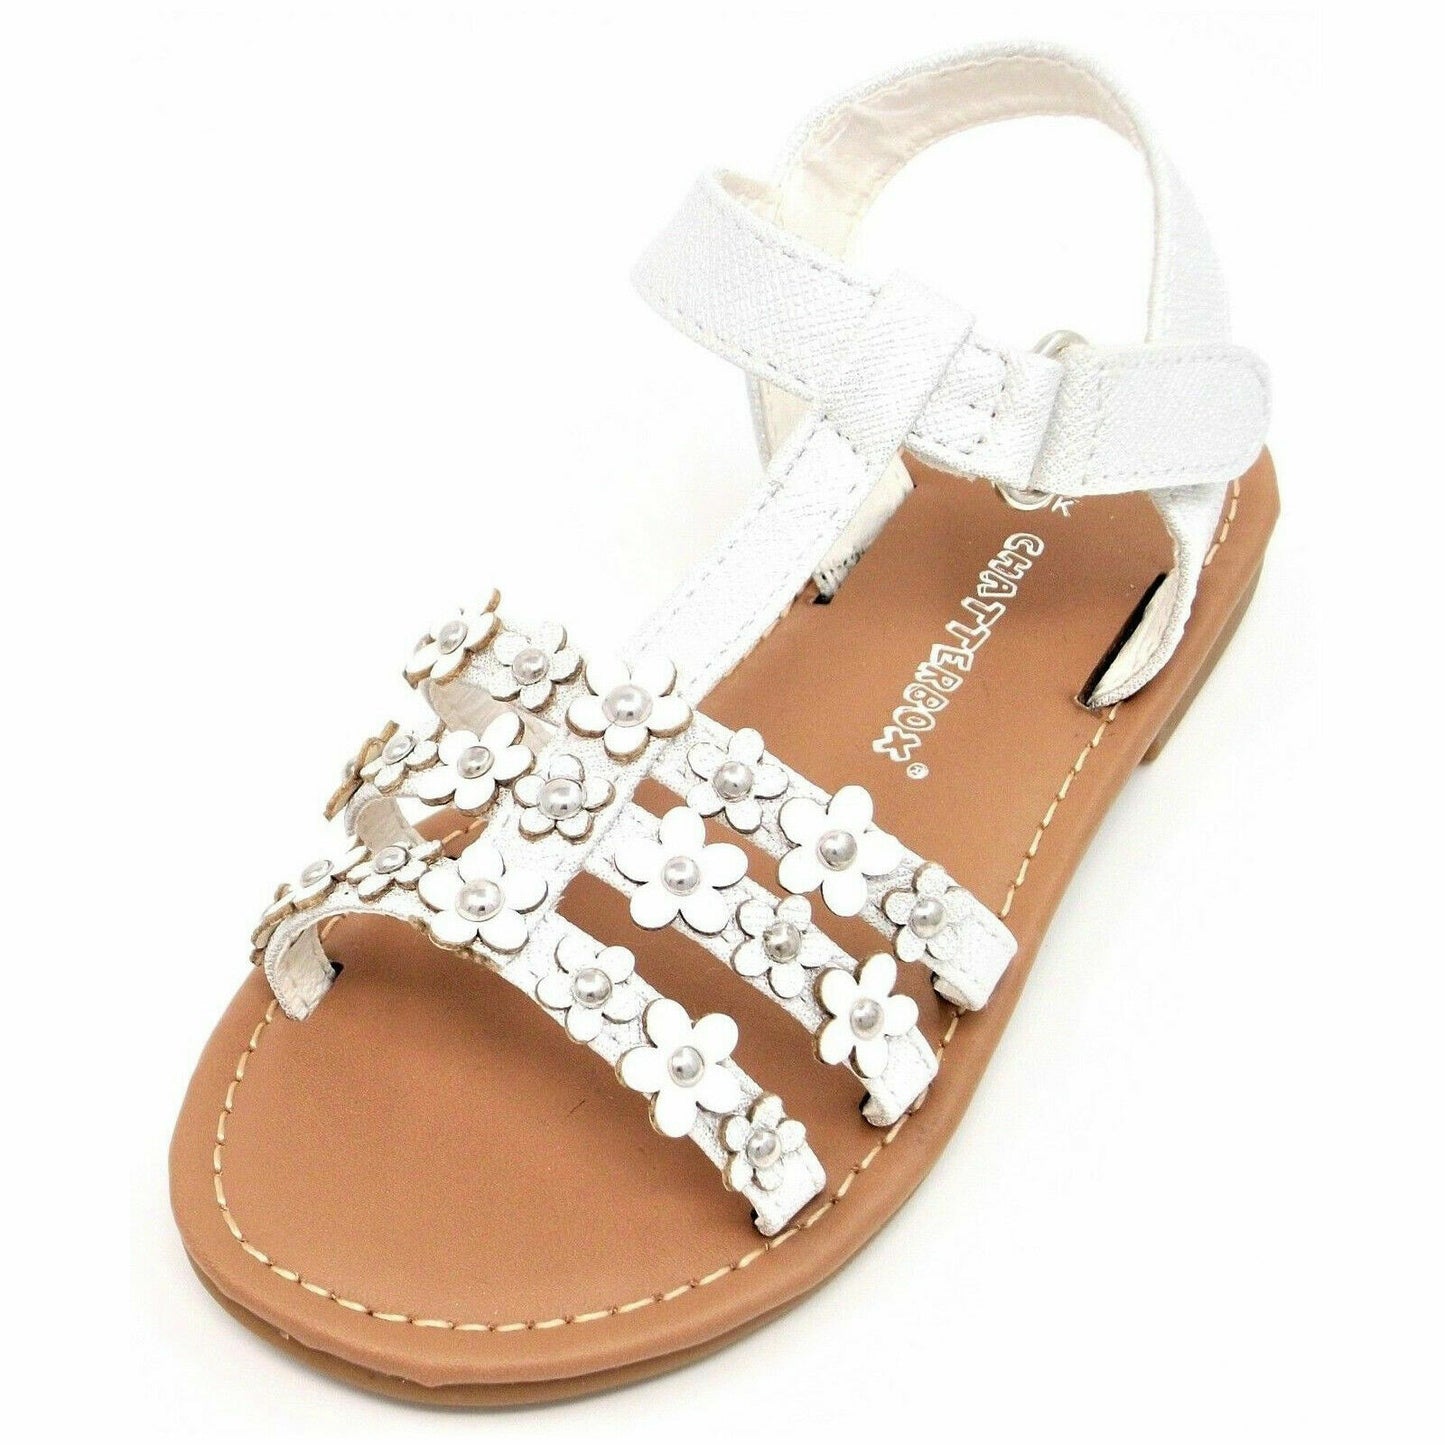 GIRLS CHILDREN SUMMER SANDALS CASUAL HOLIDAY FLAT PARTY PRINCESS FLIP FLOP SHOES